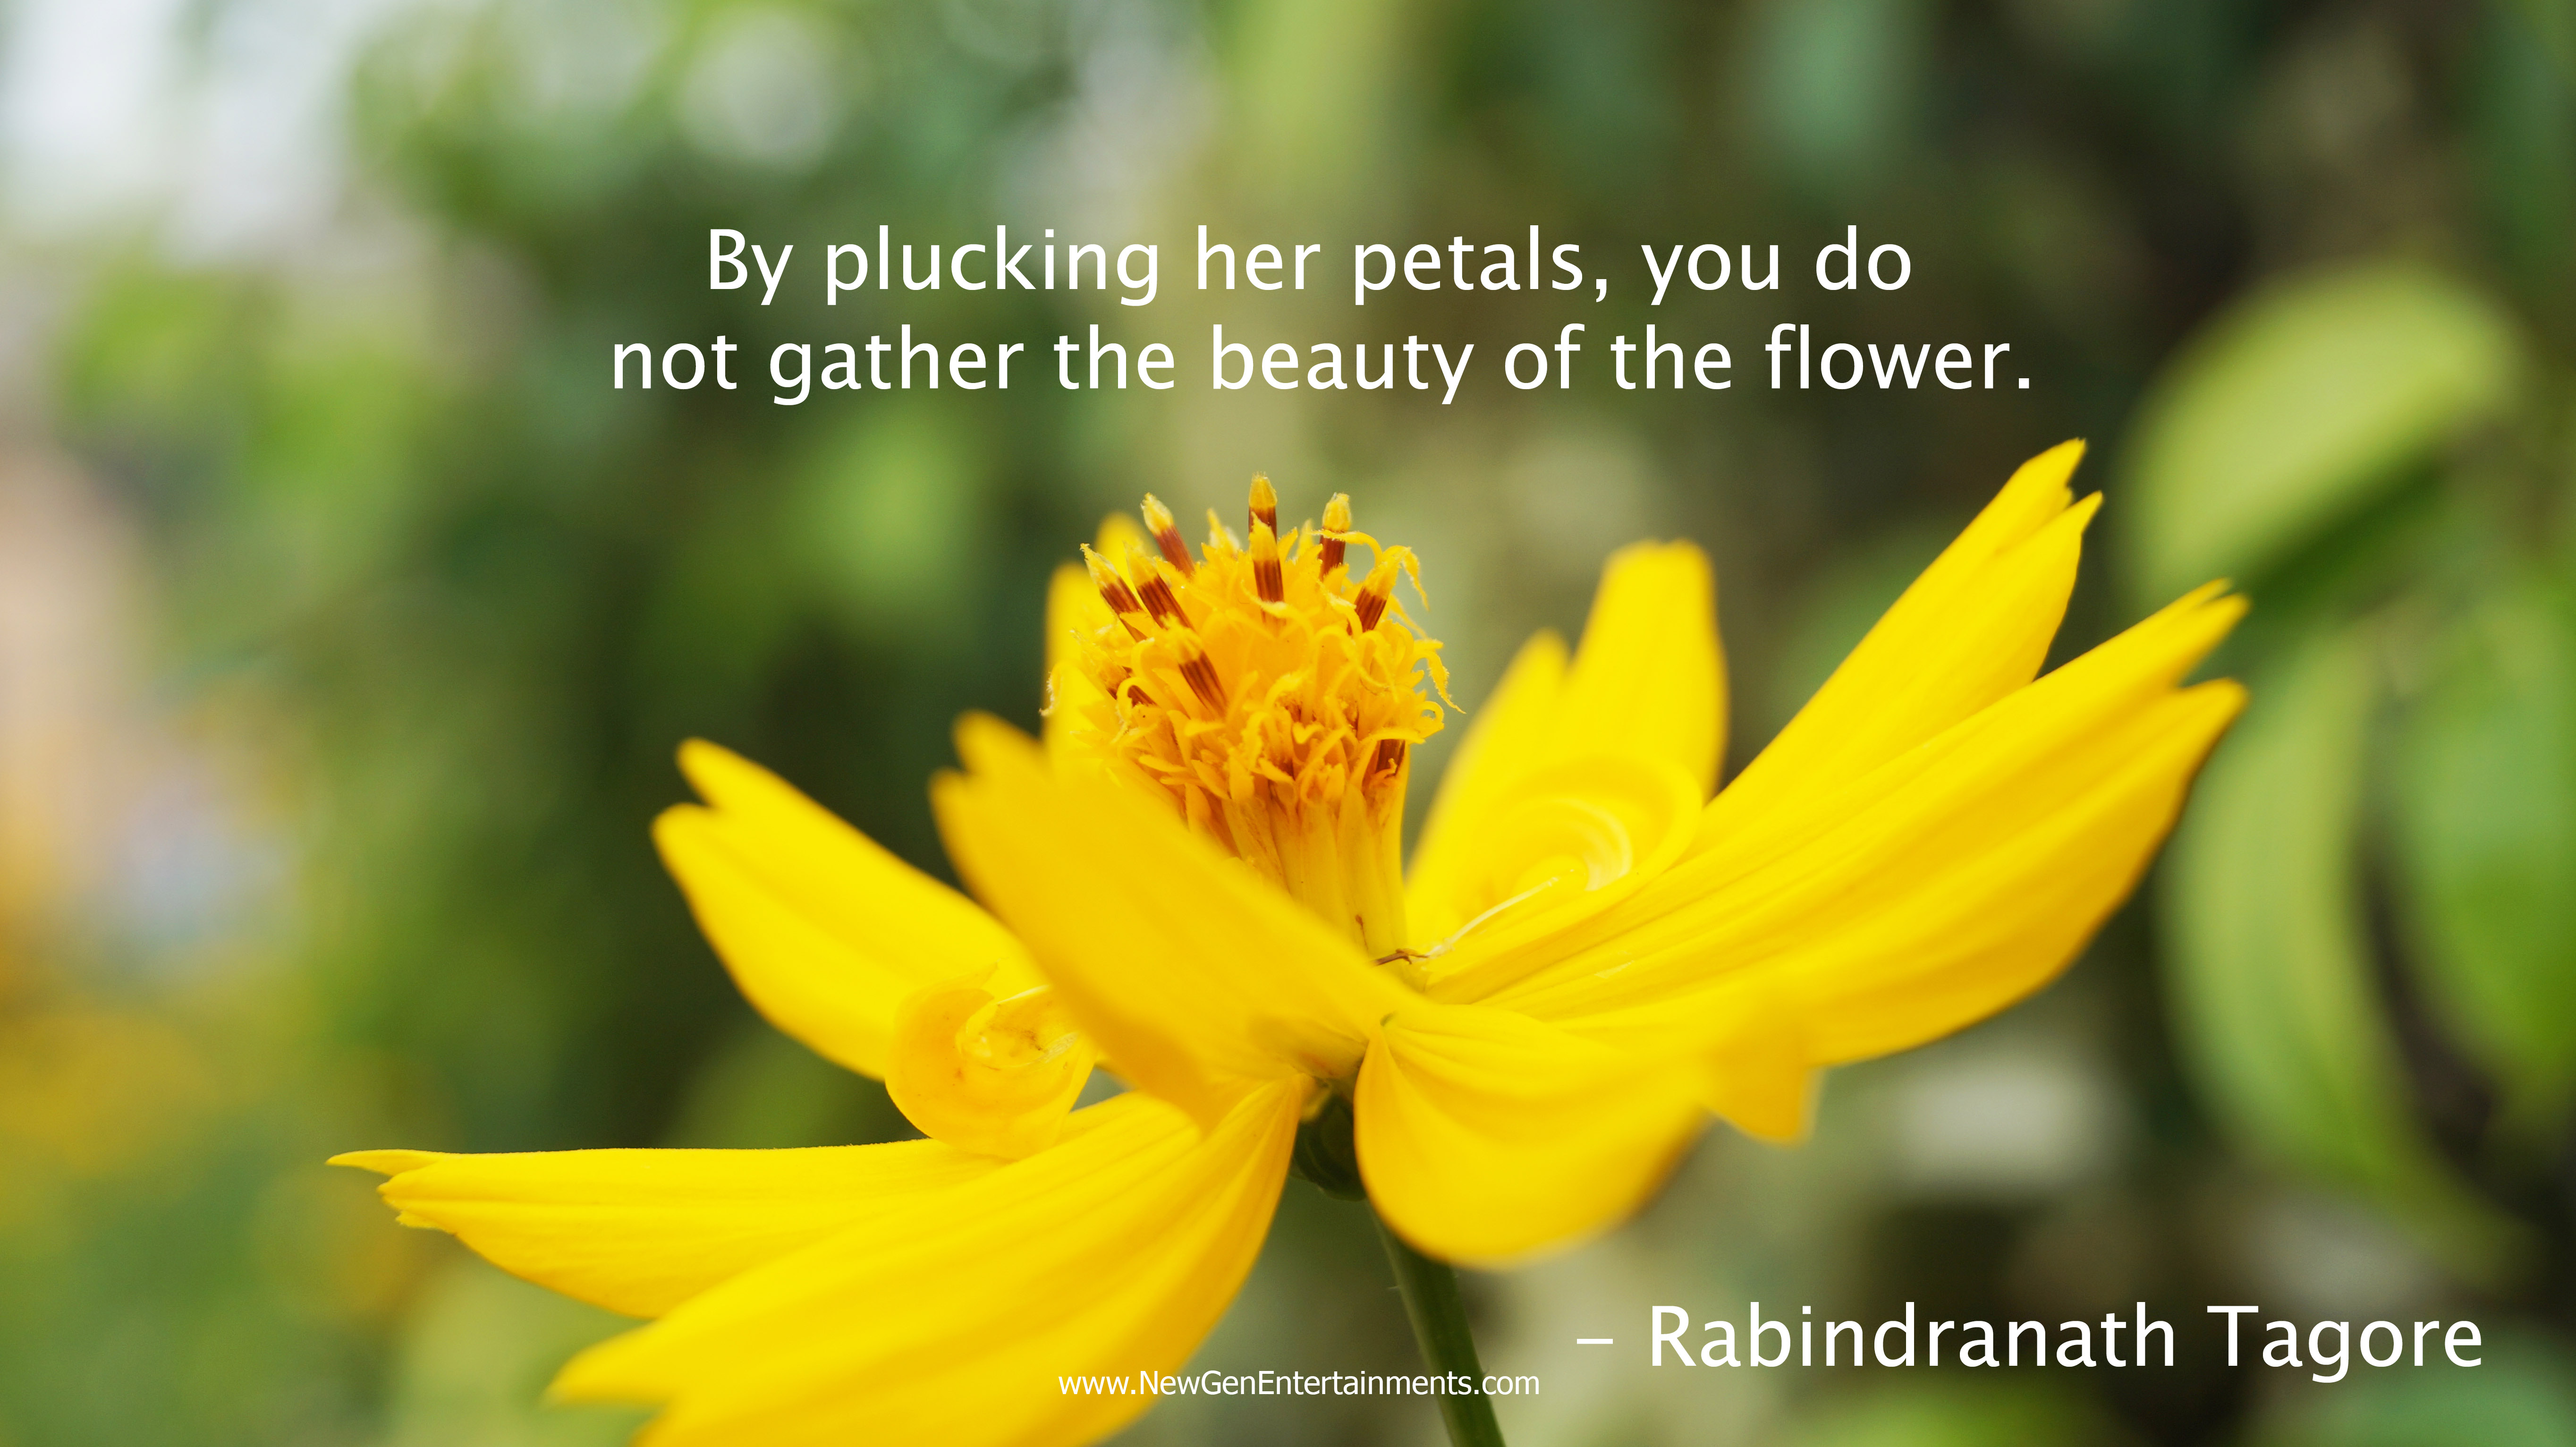 By plucking her petals, you do not gather the beauty of the flower